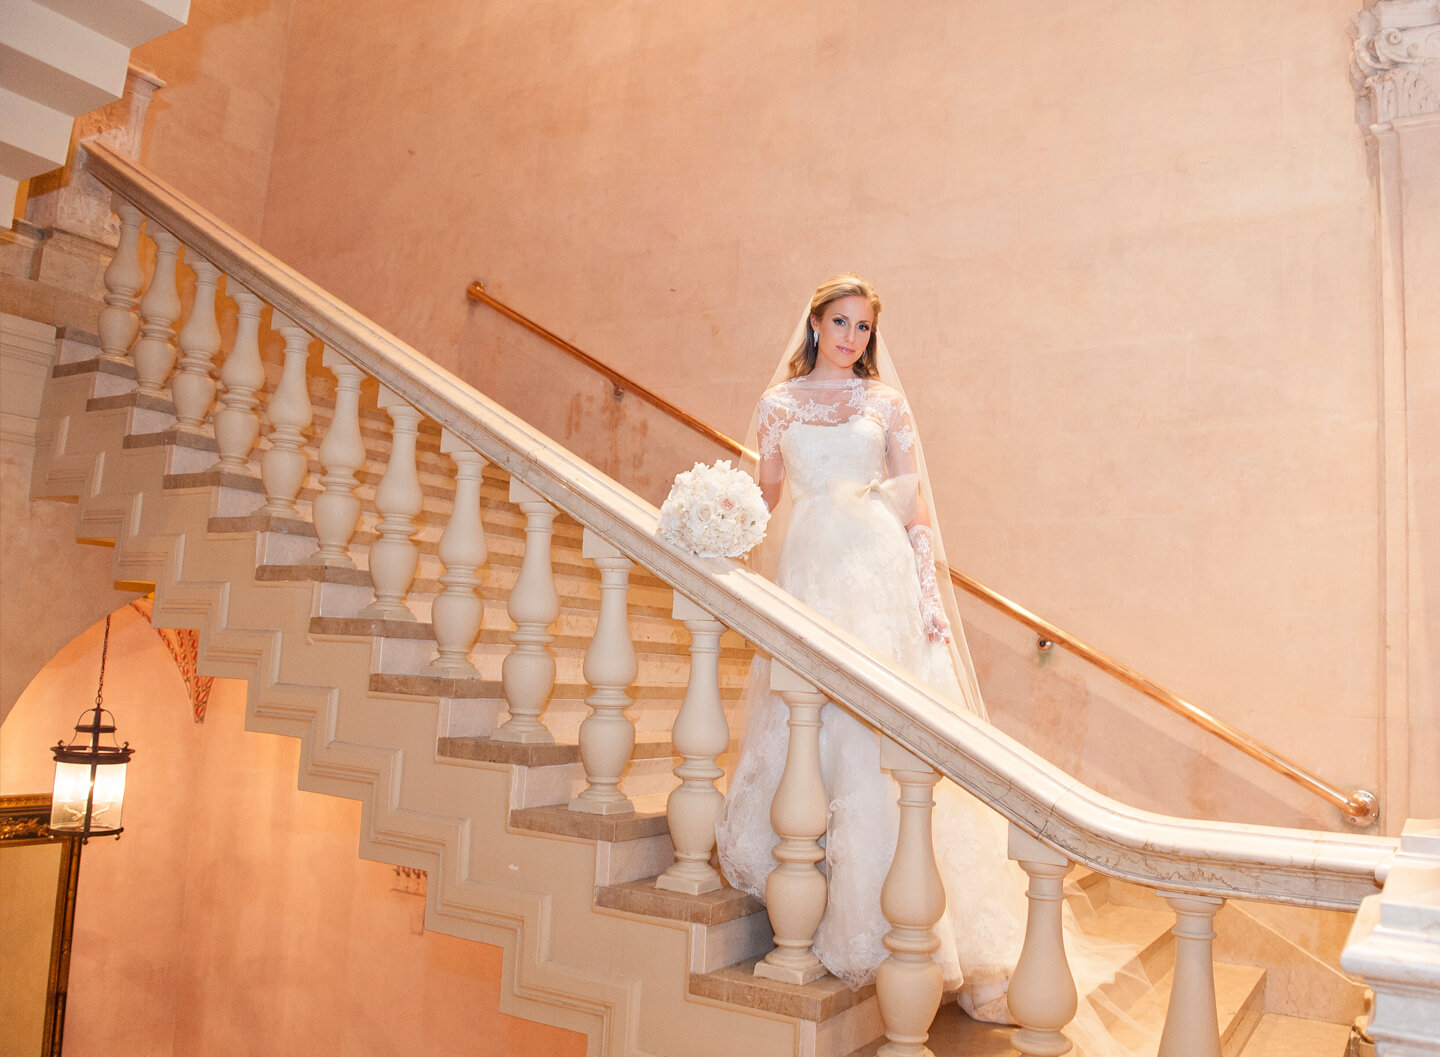 Bride posing in Stairwell at Plaza Hotel